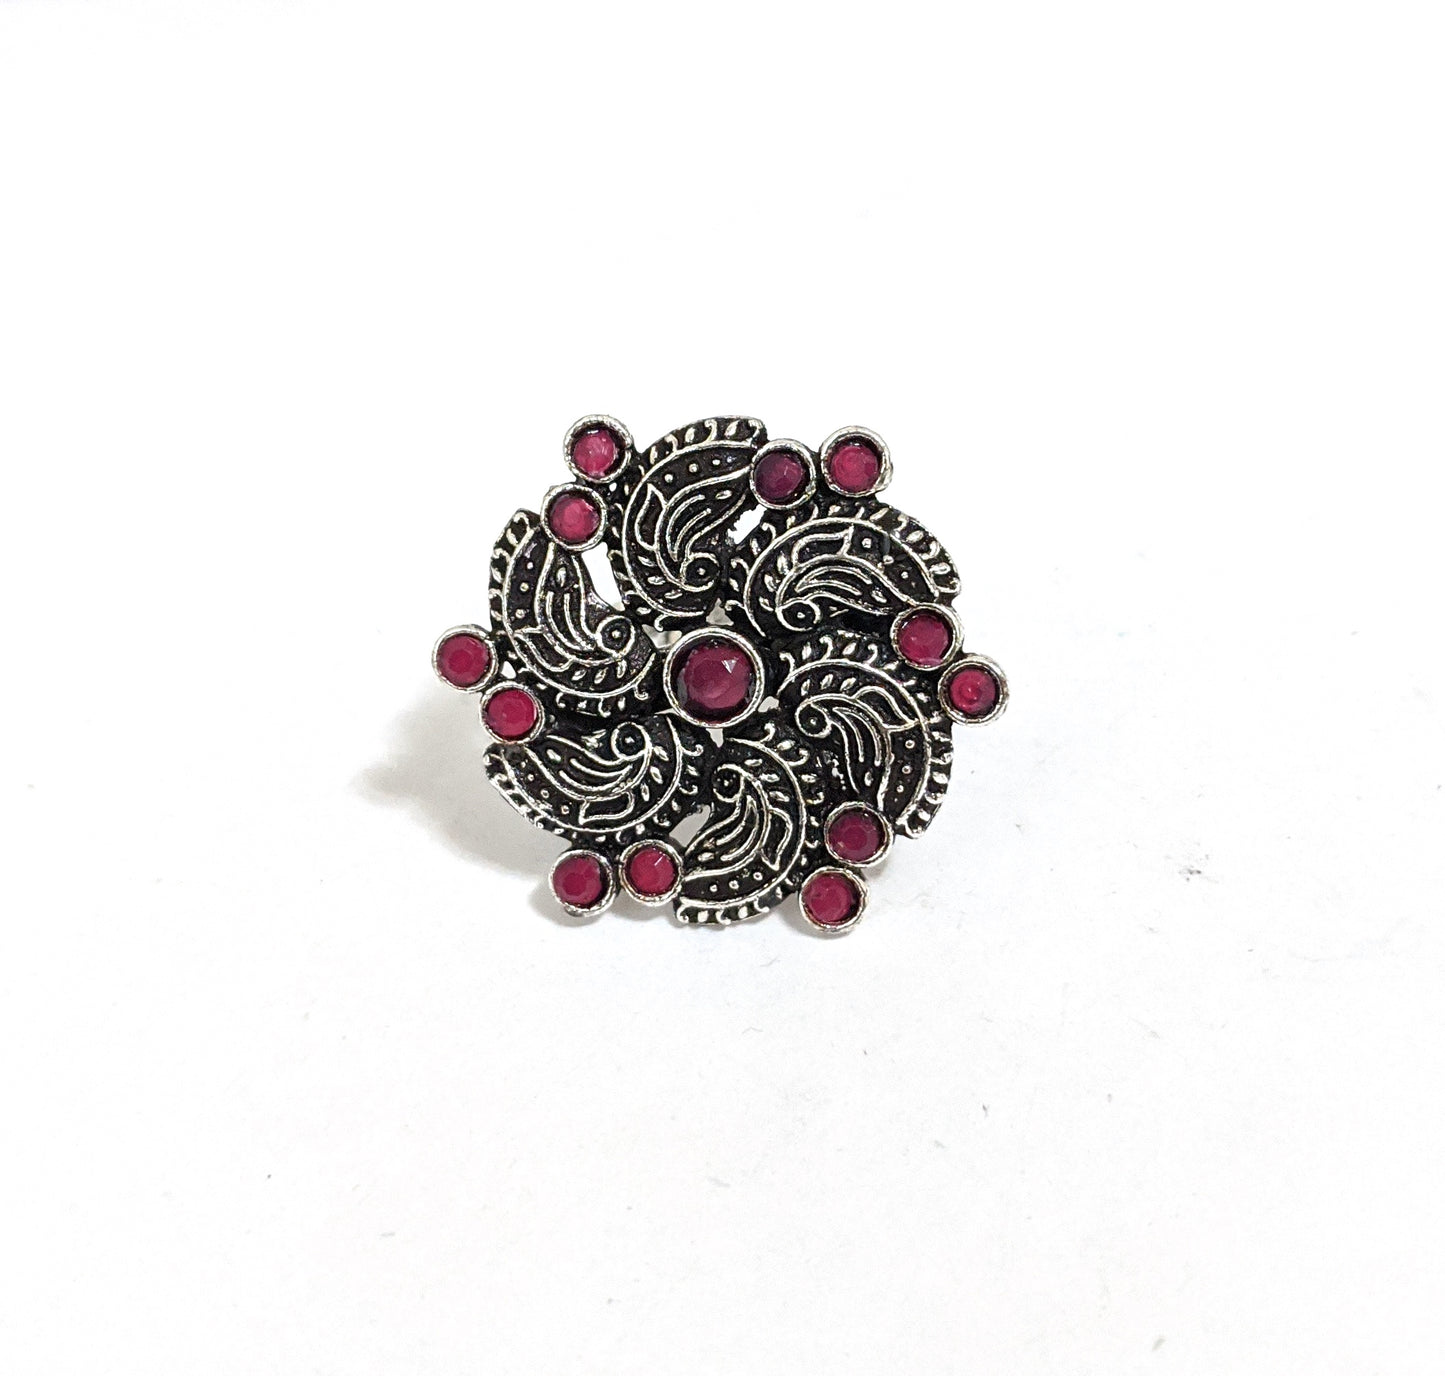 Oxidized silver Peacock flower design Adjustable Finger rings - Simpliful